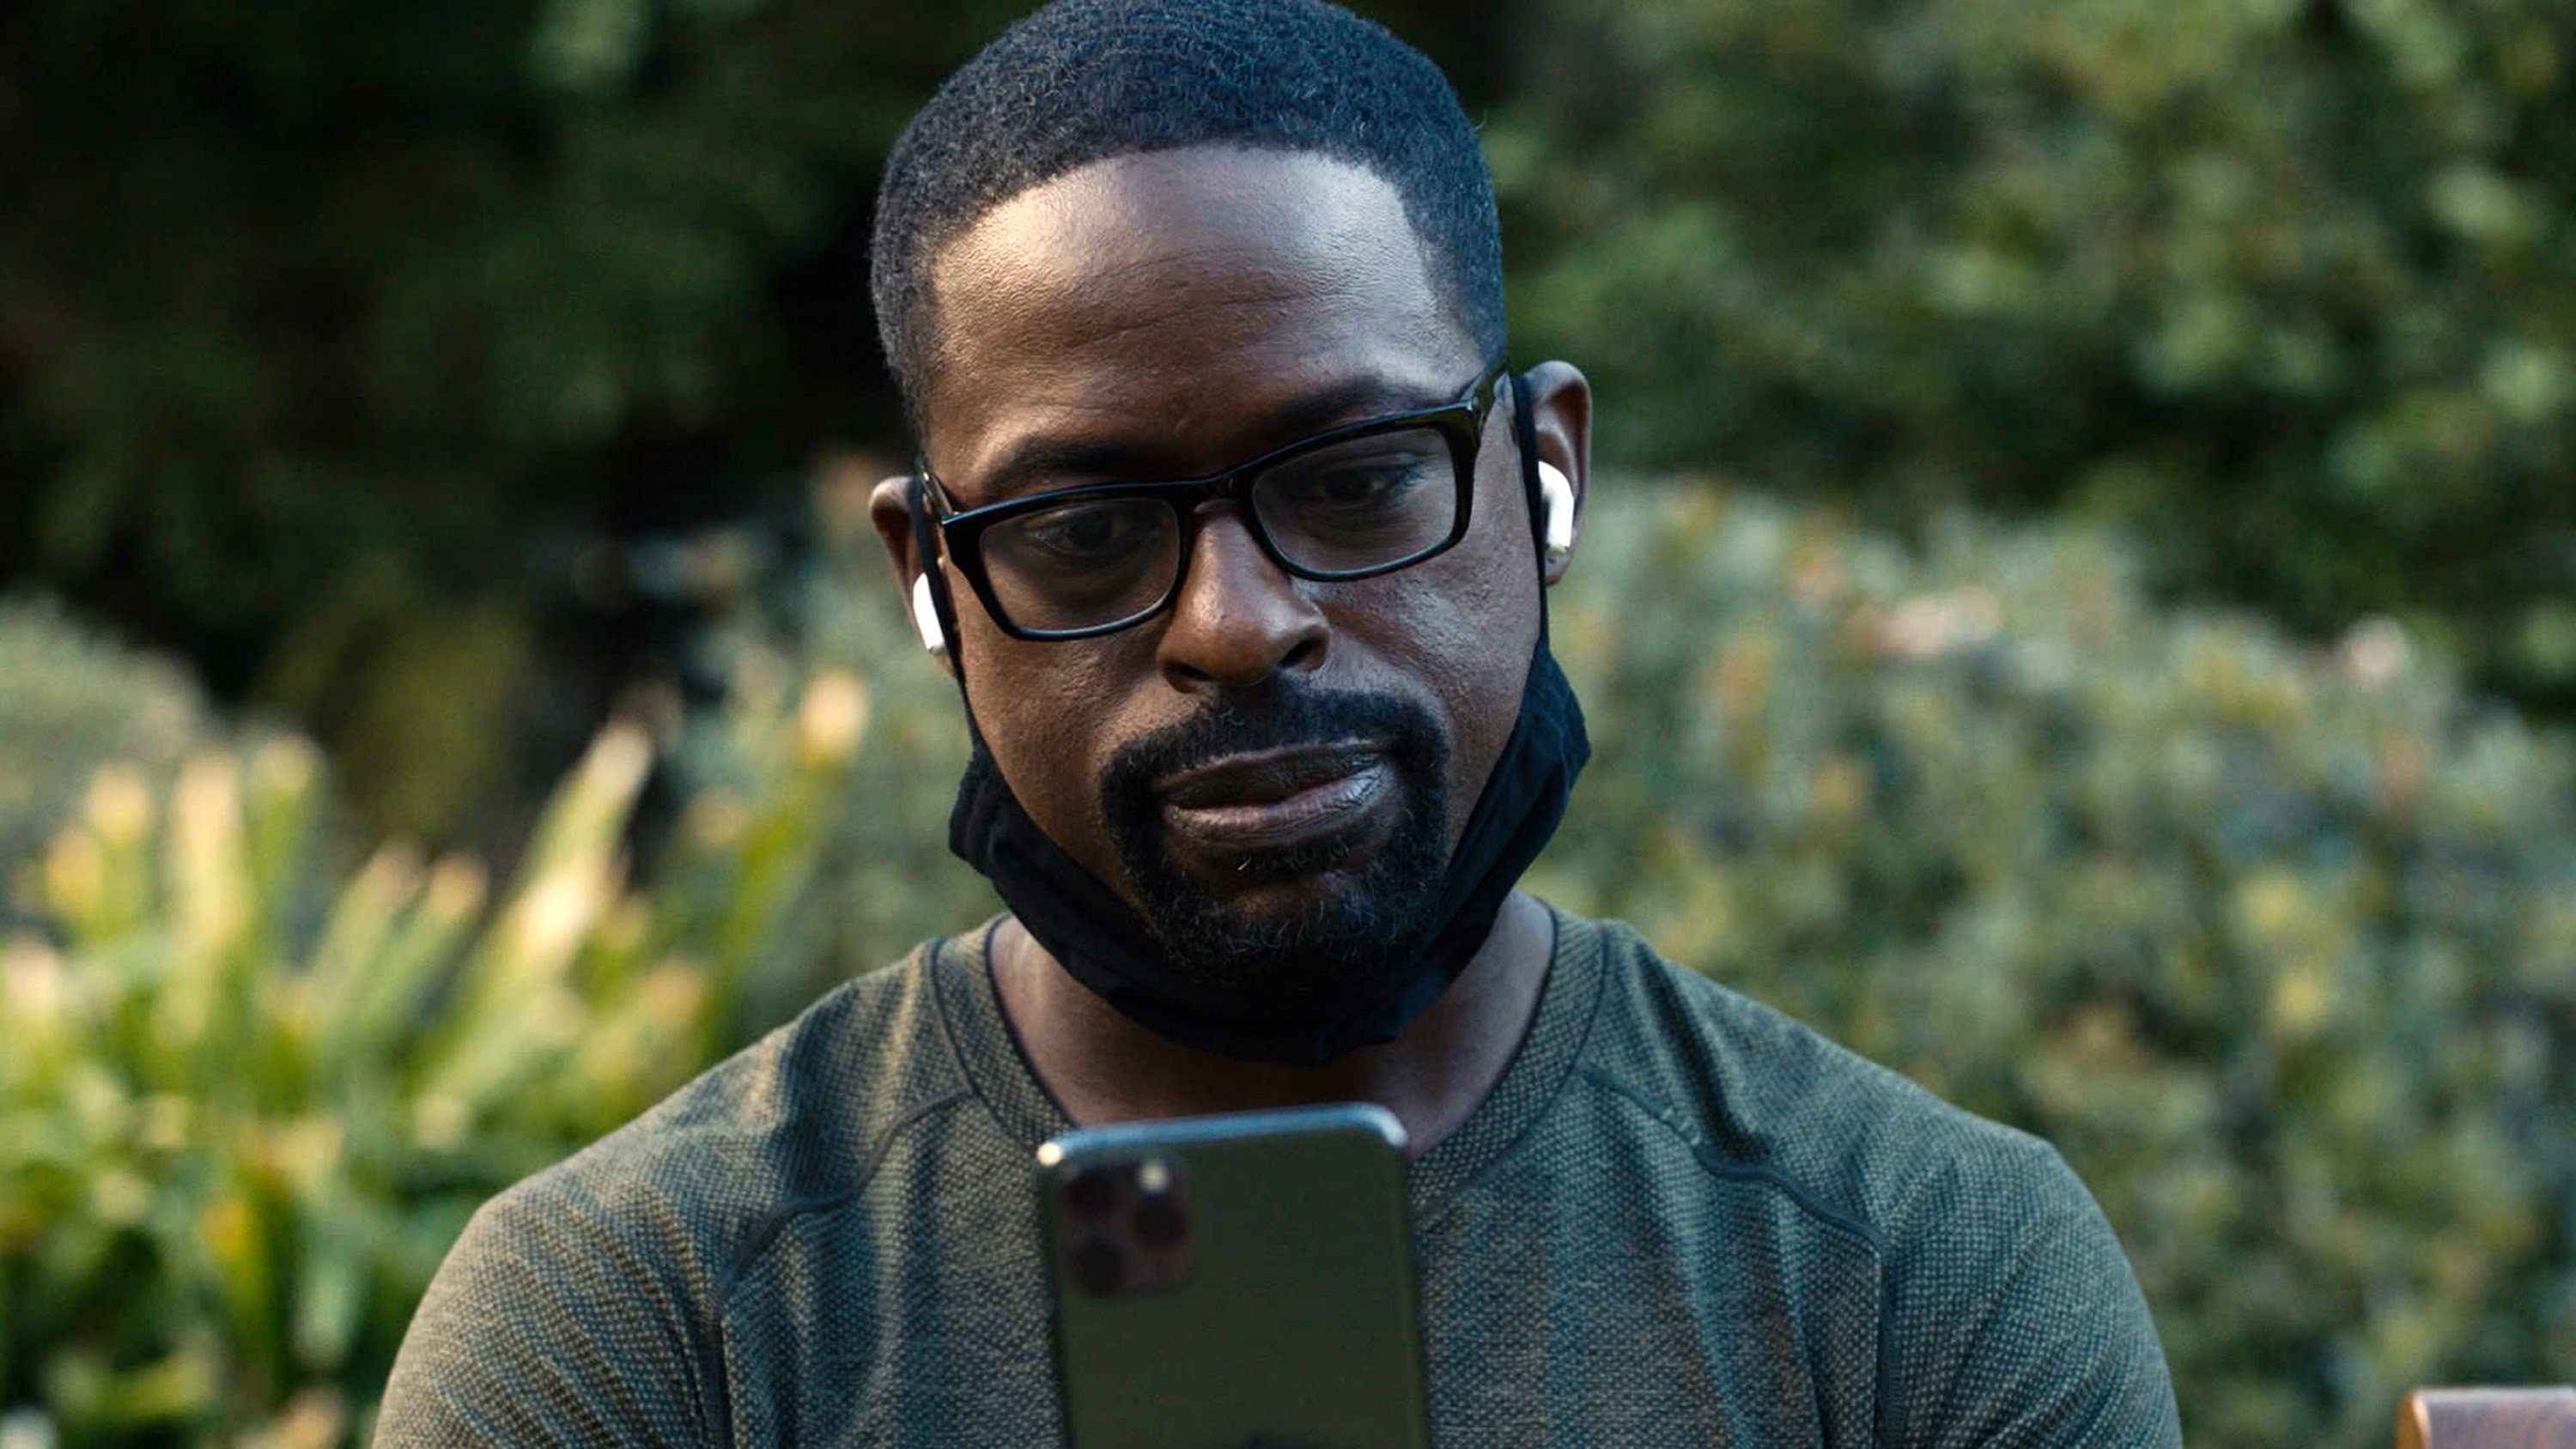 This Is Us Randall Pearson portrayed by Sterling K. Brown